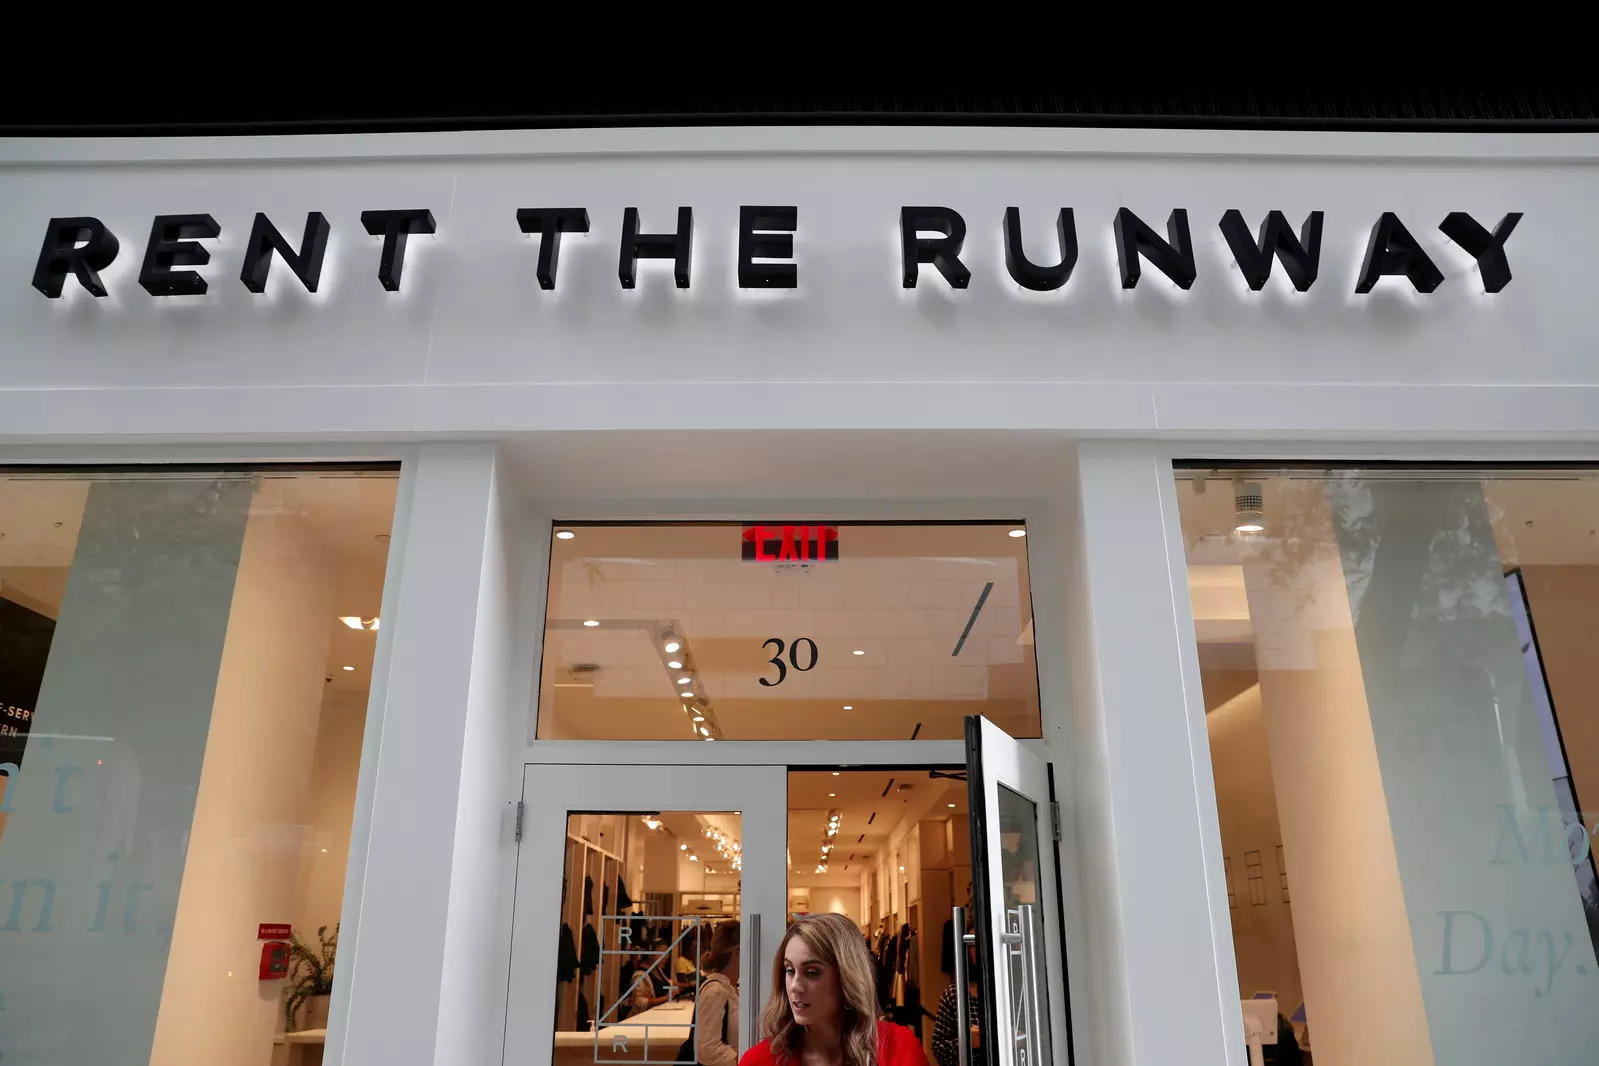 Fashion firm Rent the Runway struts into Wall Street with $1.7 billion valuation